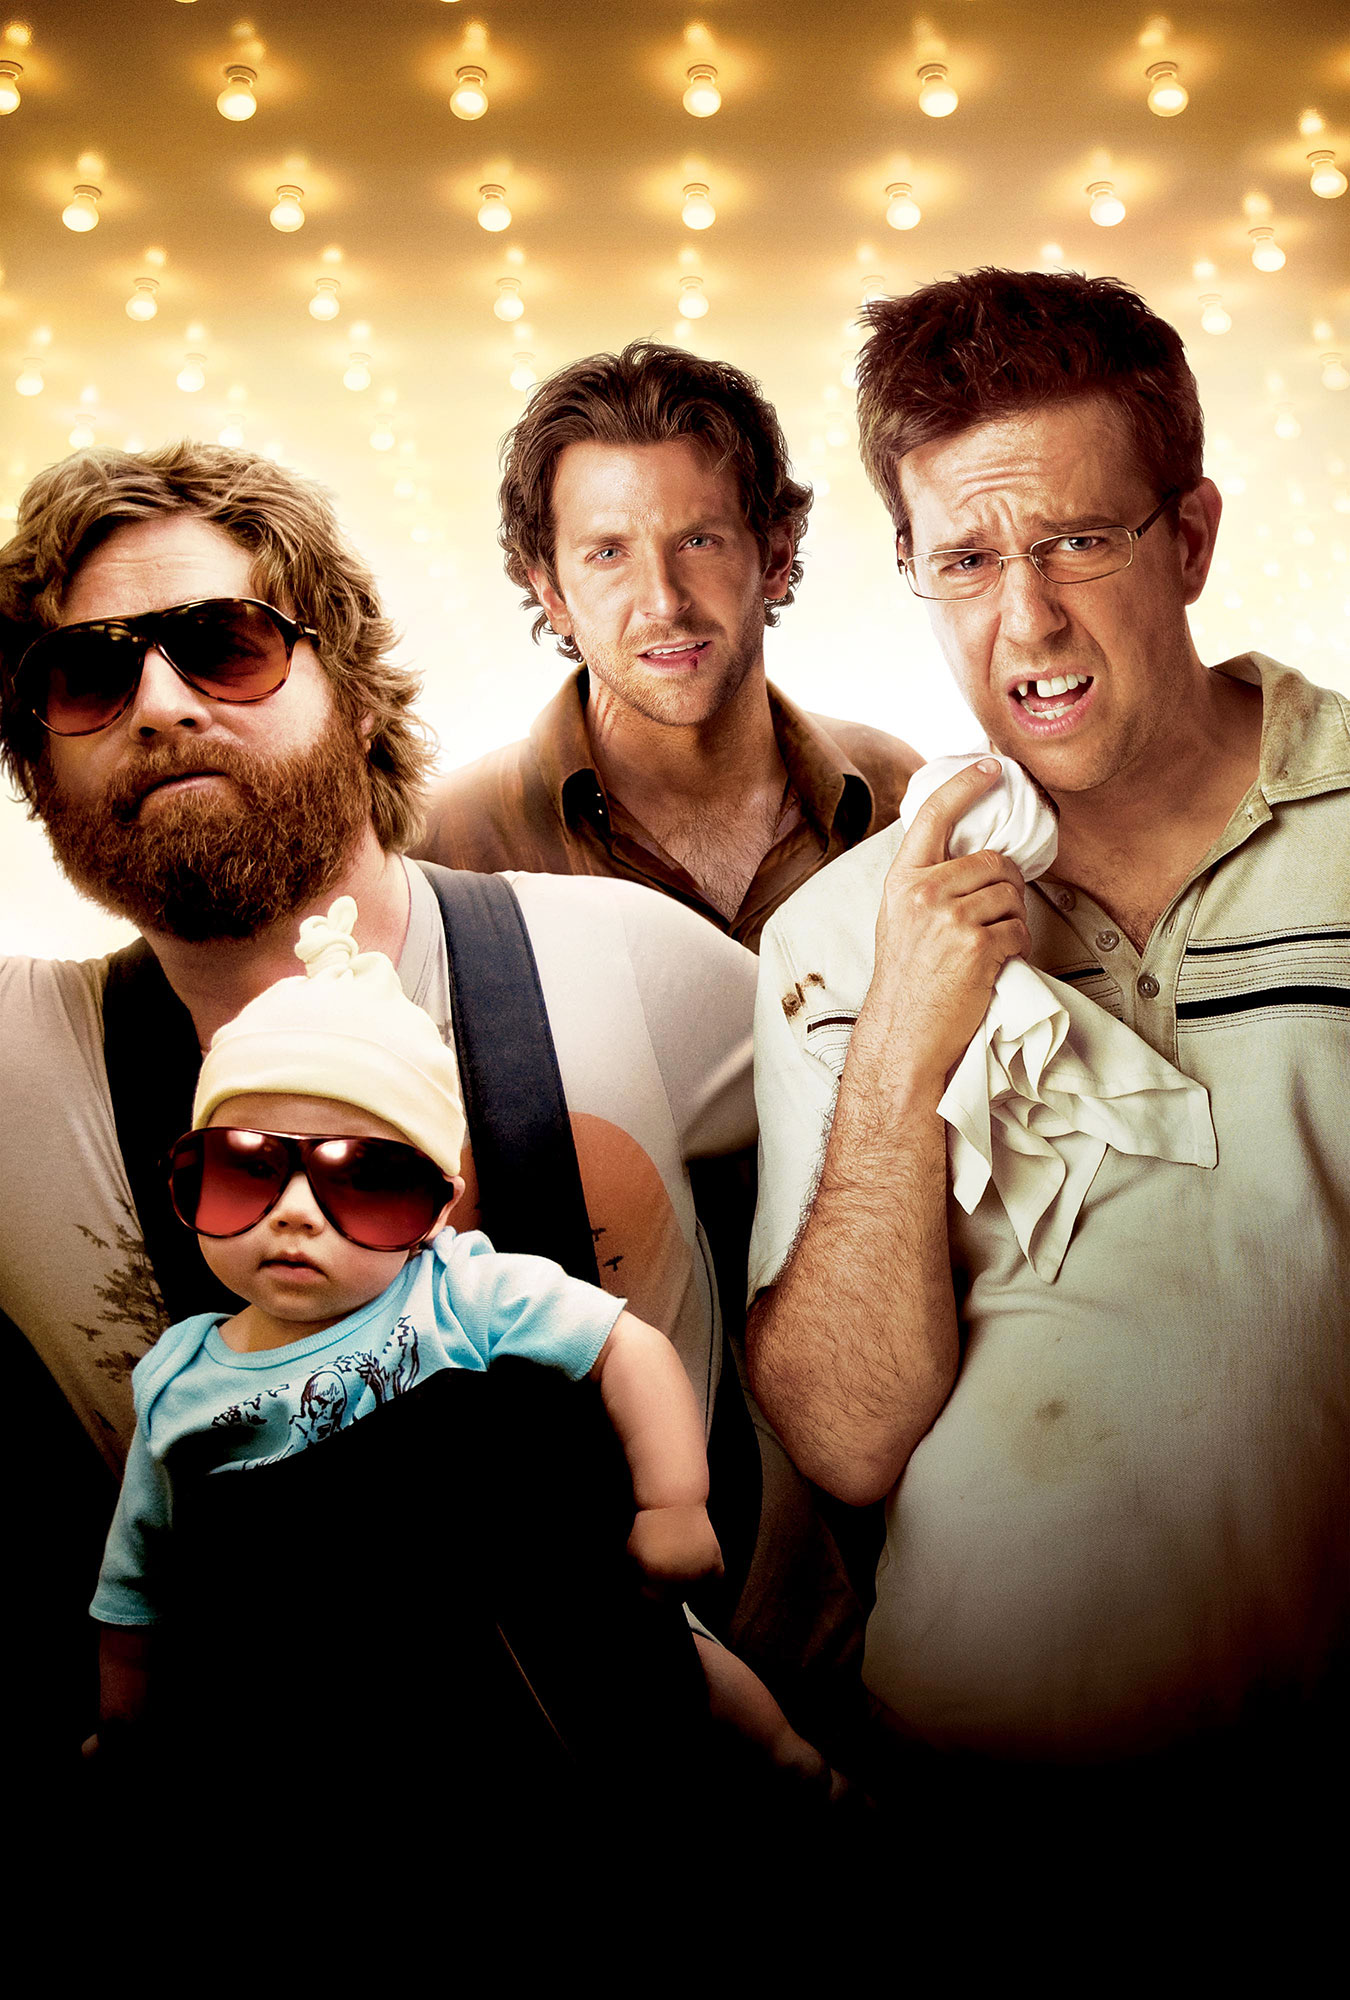 Ed Helms' New Movie Is Like The Hangover But With A Giant Game Of Tag